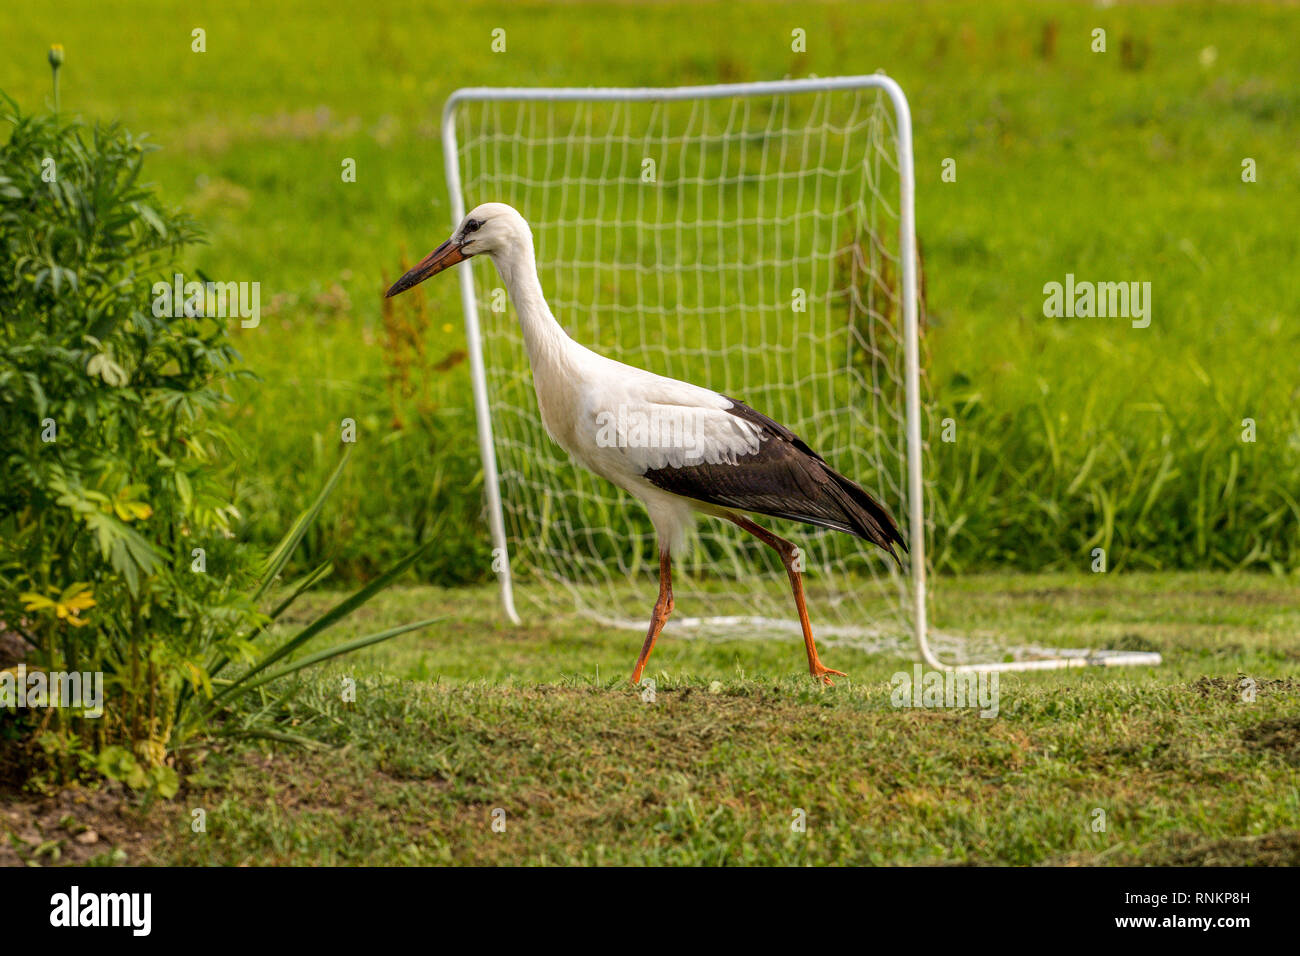 White stork in the yard the countryside Stock Photo